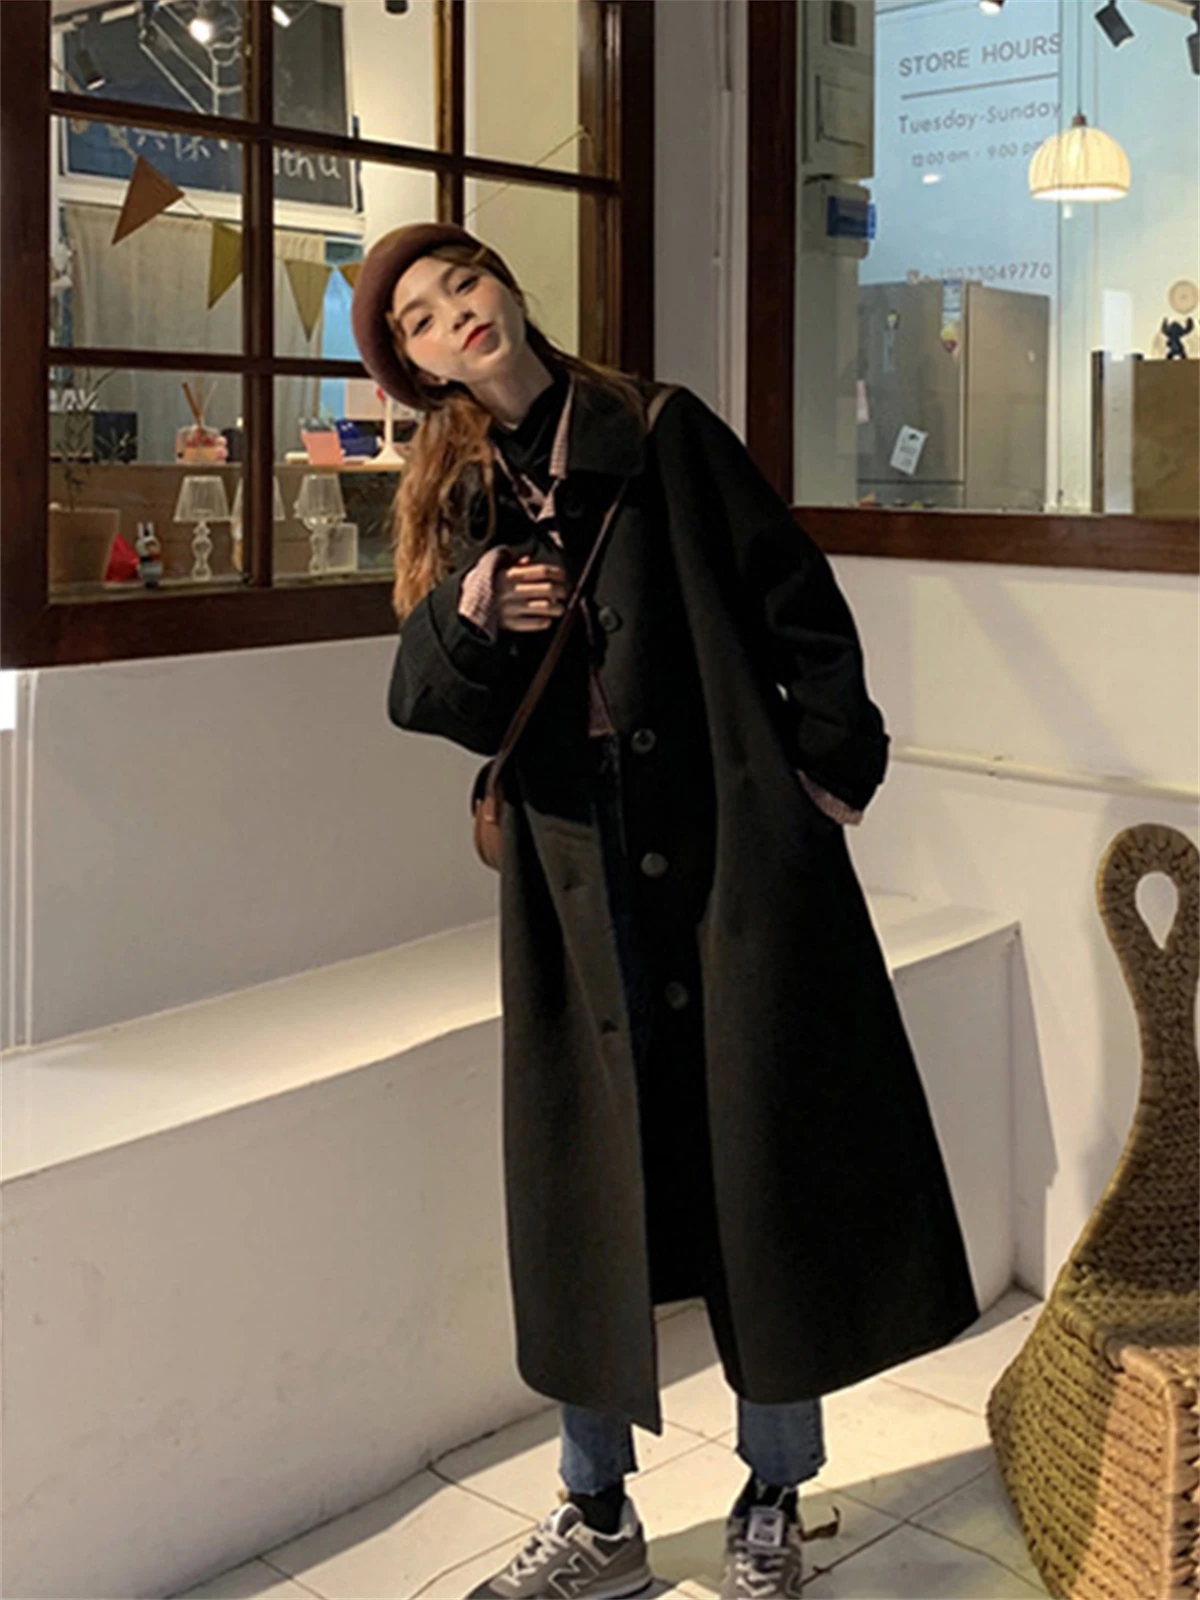 Double Sided Cashmere Woolen Coat For Small Women In Autumn And Winter 2022 New Korean Black Medium Long Woolen Coat 300cm green membrane foam black double sided tape non marking ultra thin waterproof resistant tape for mobile phone repair